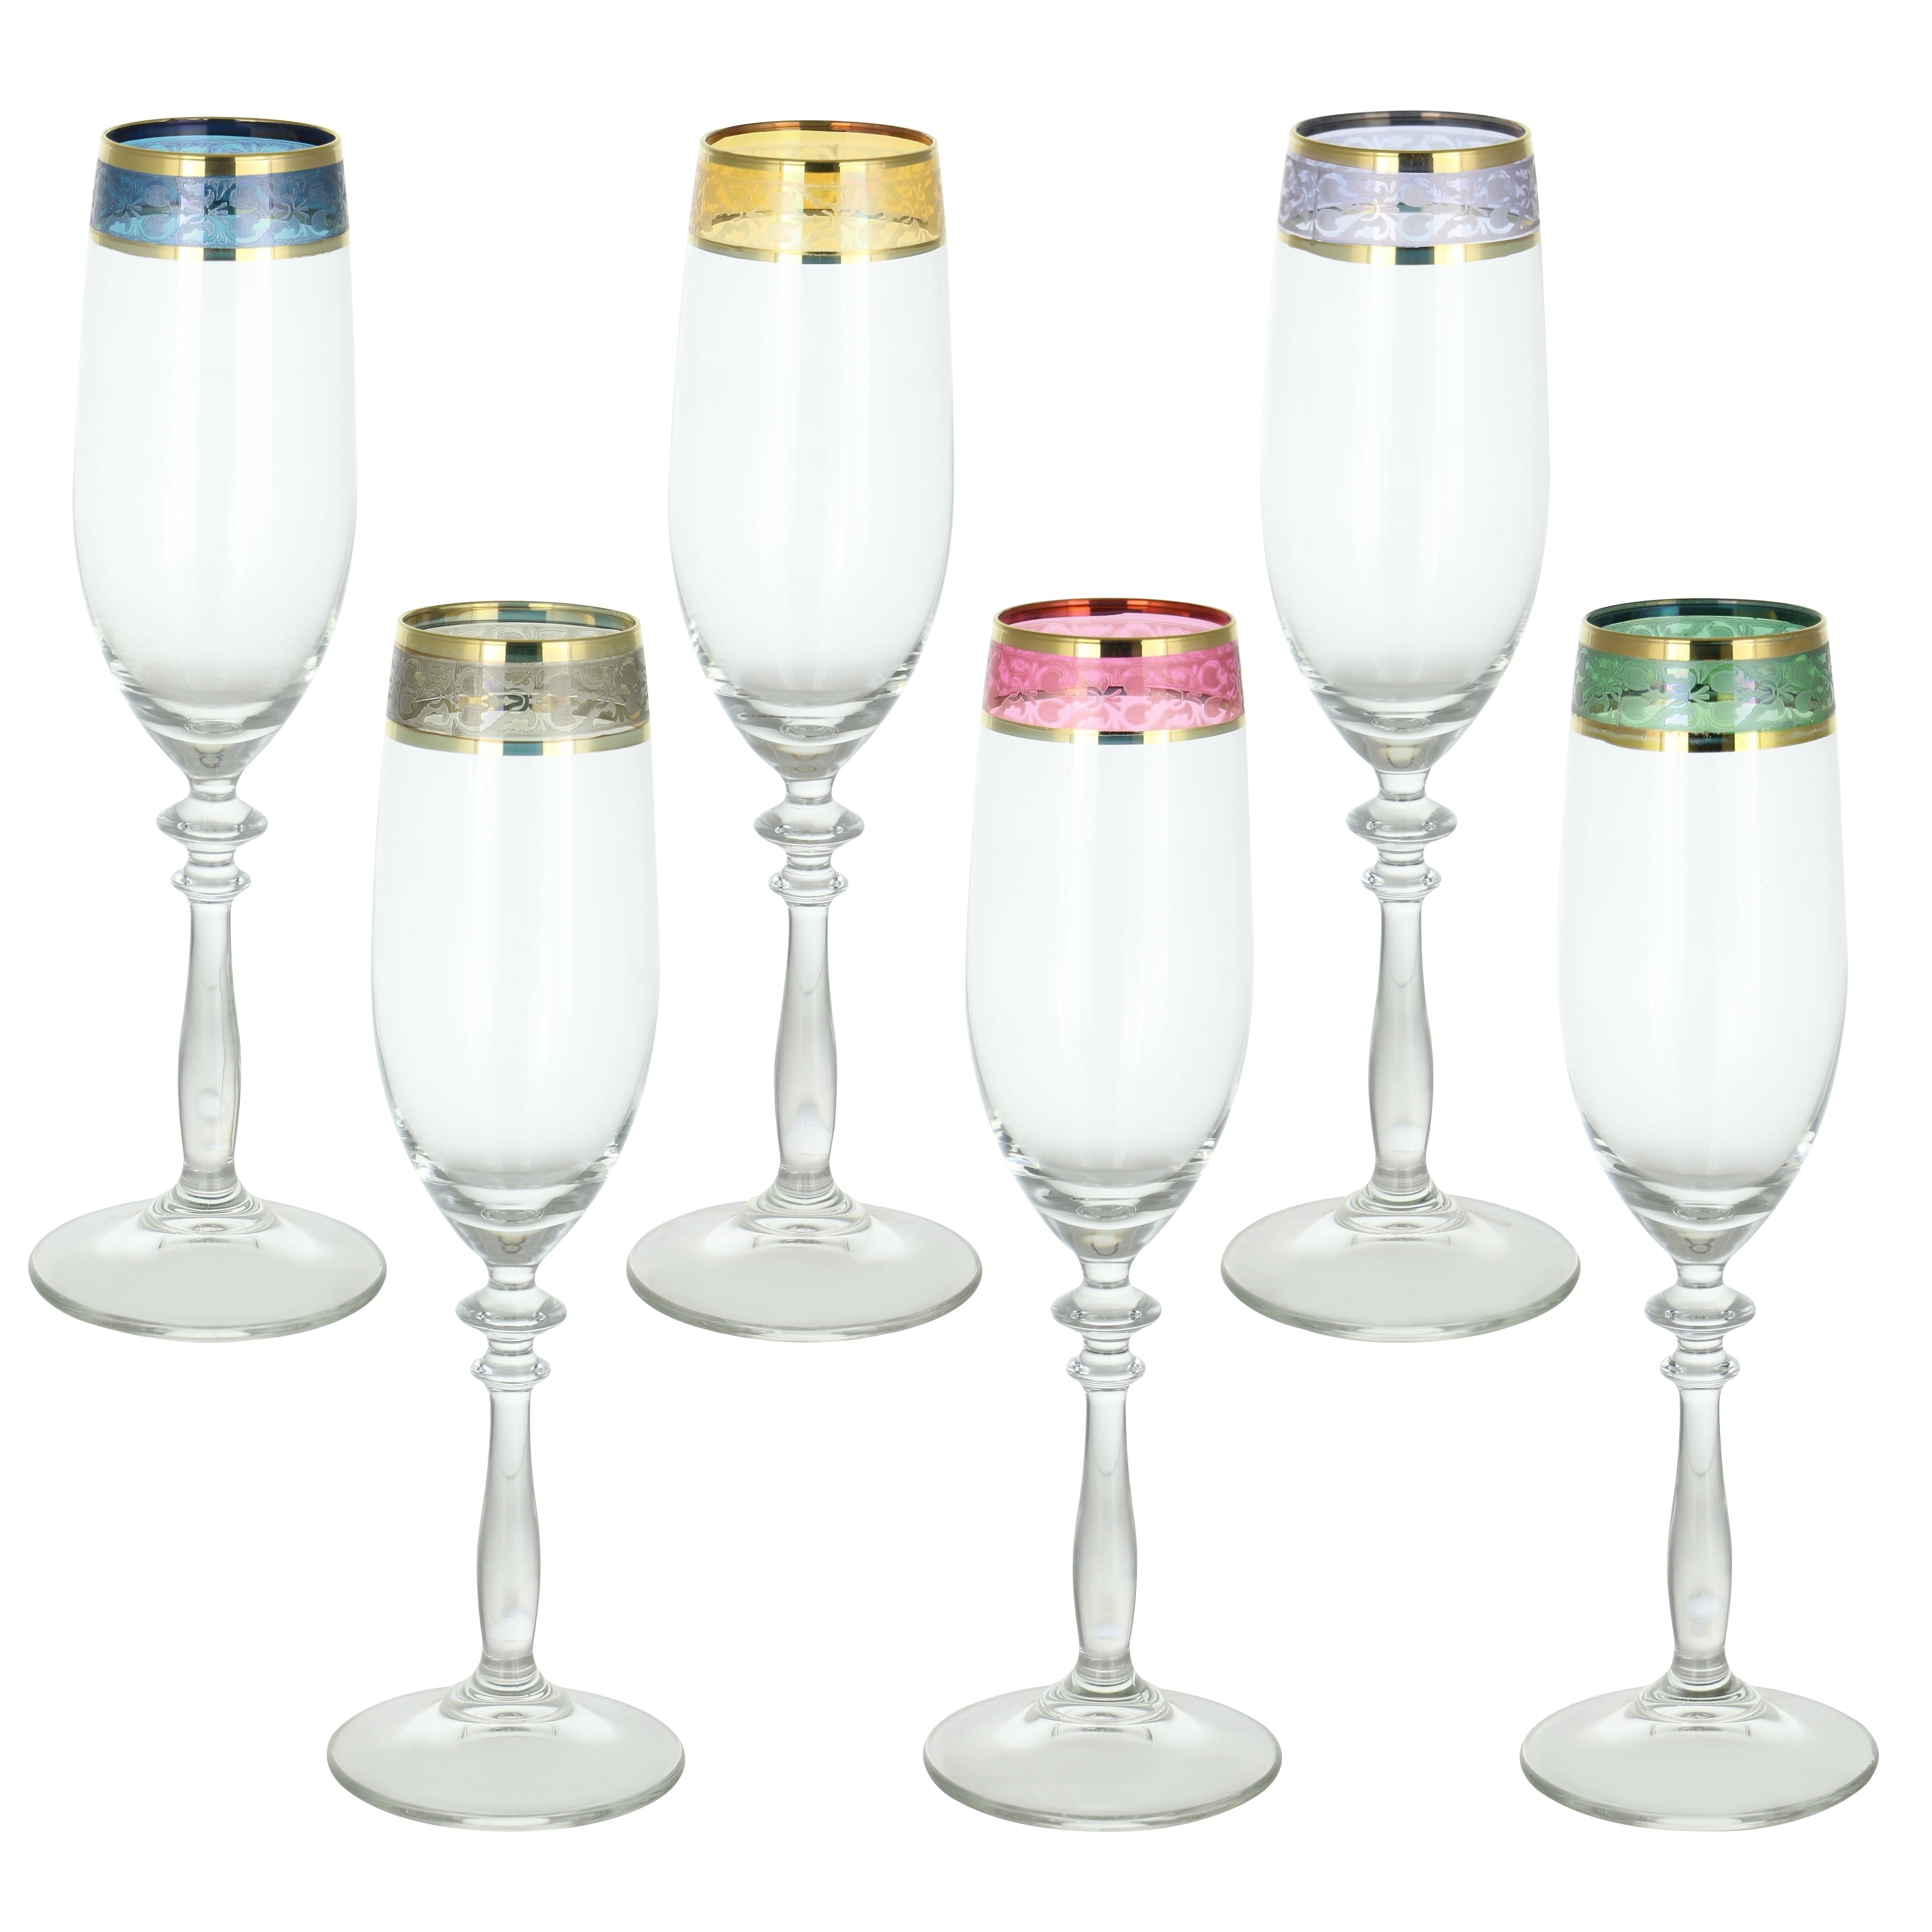 Hand Blown Crafted Striped Balloon Wine Champagne Glasses Set of 4 